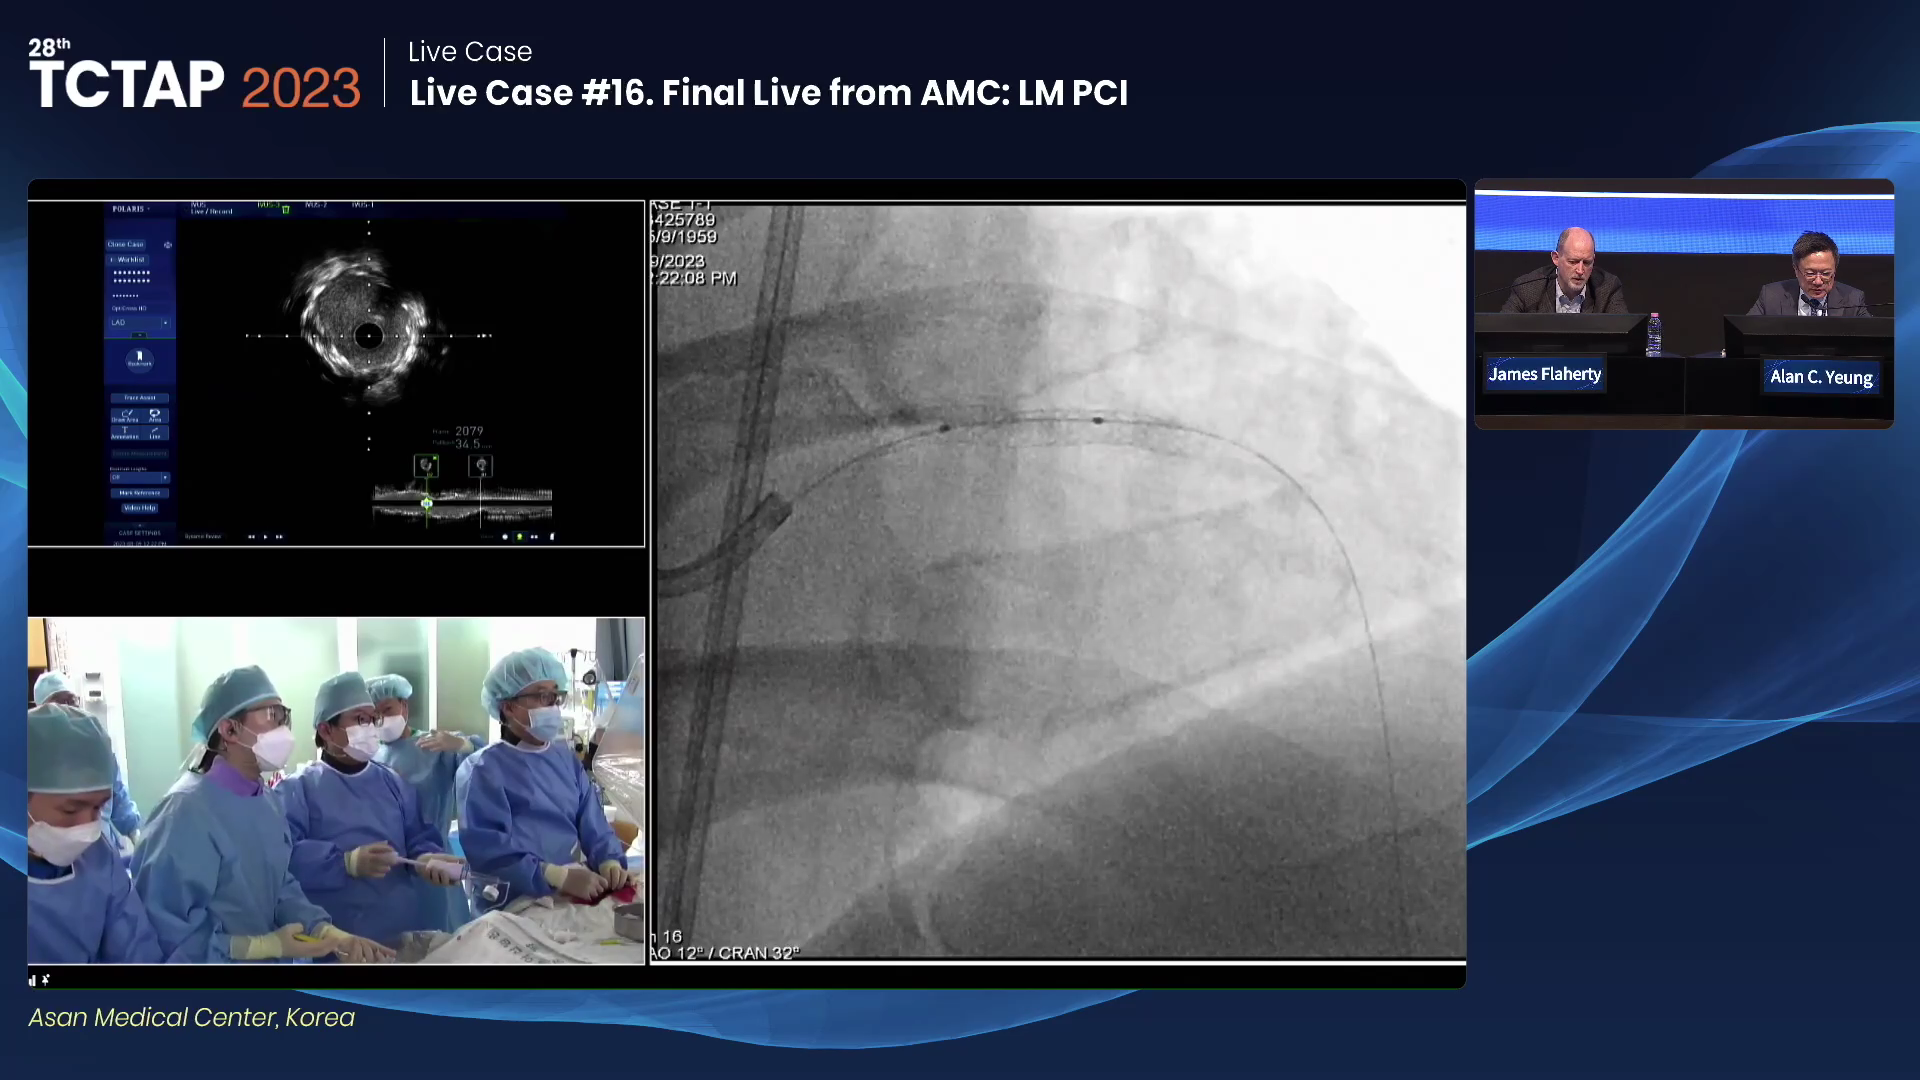 Live Case #16. Final Live from AMC: LM PCI